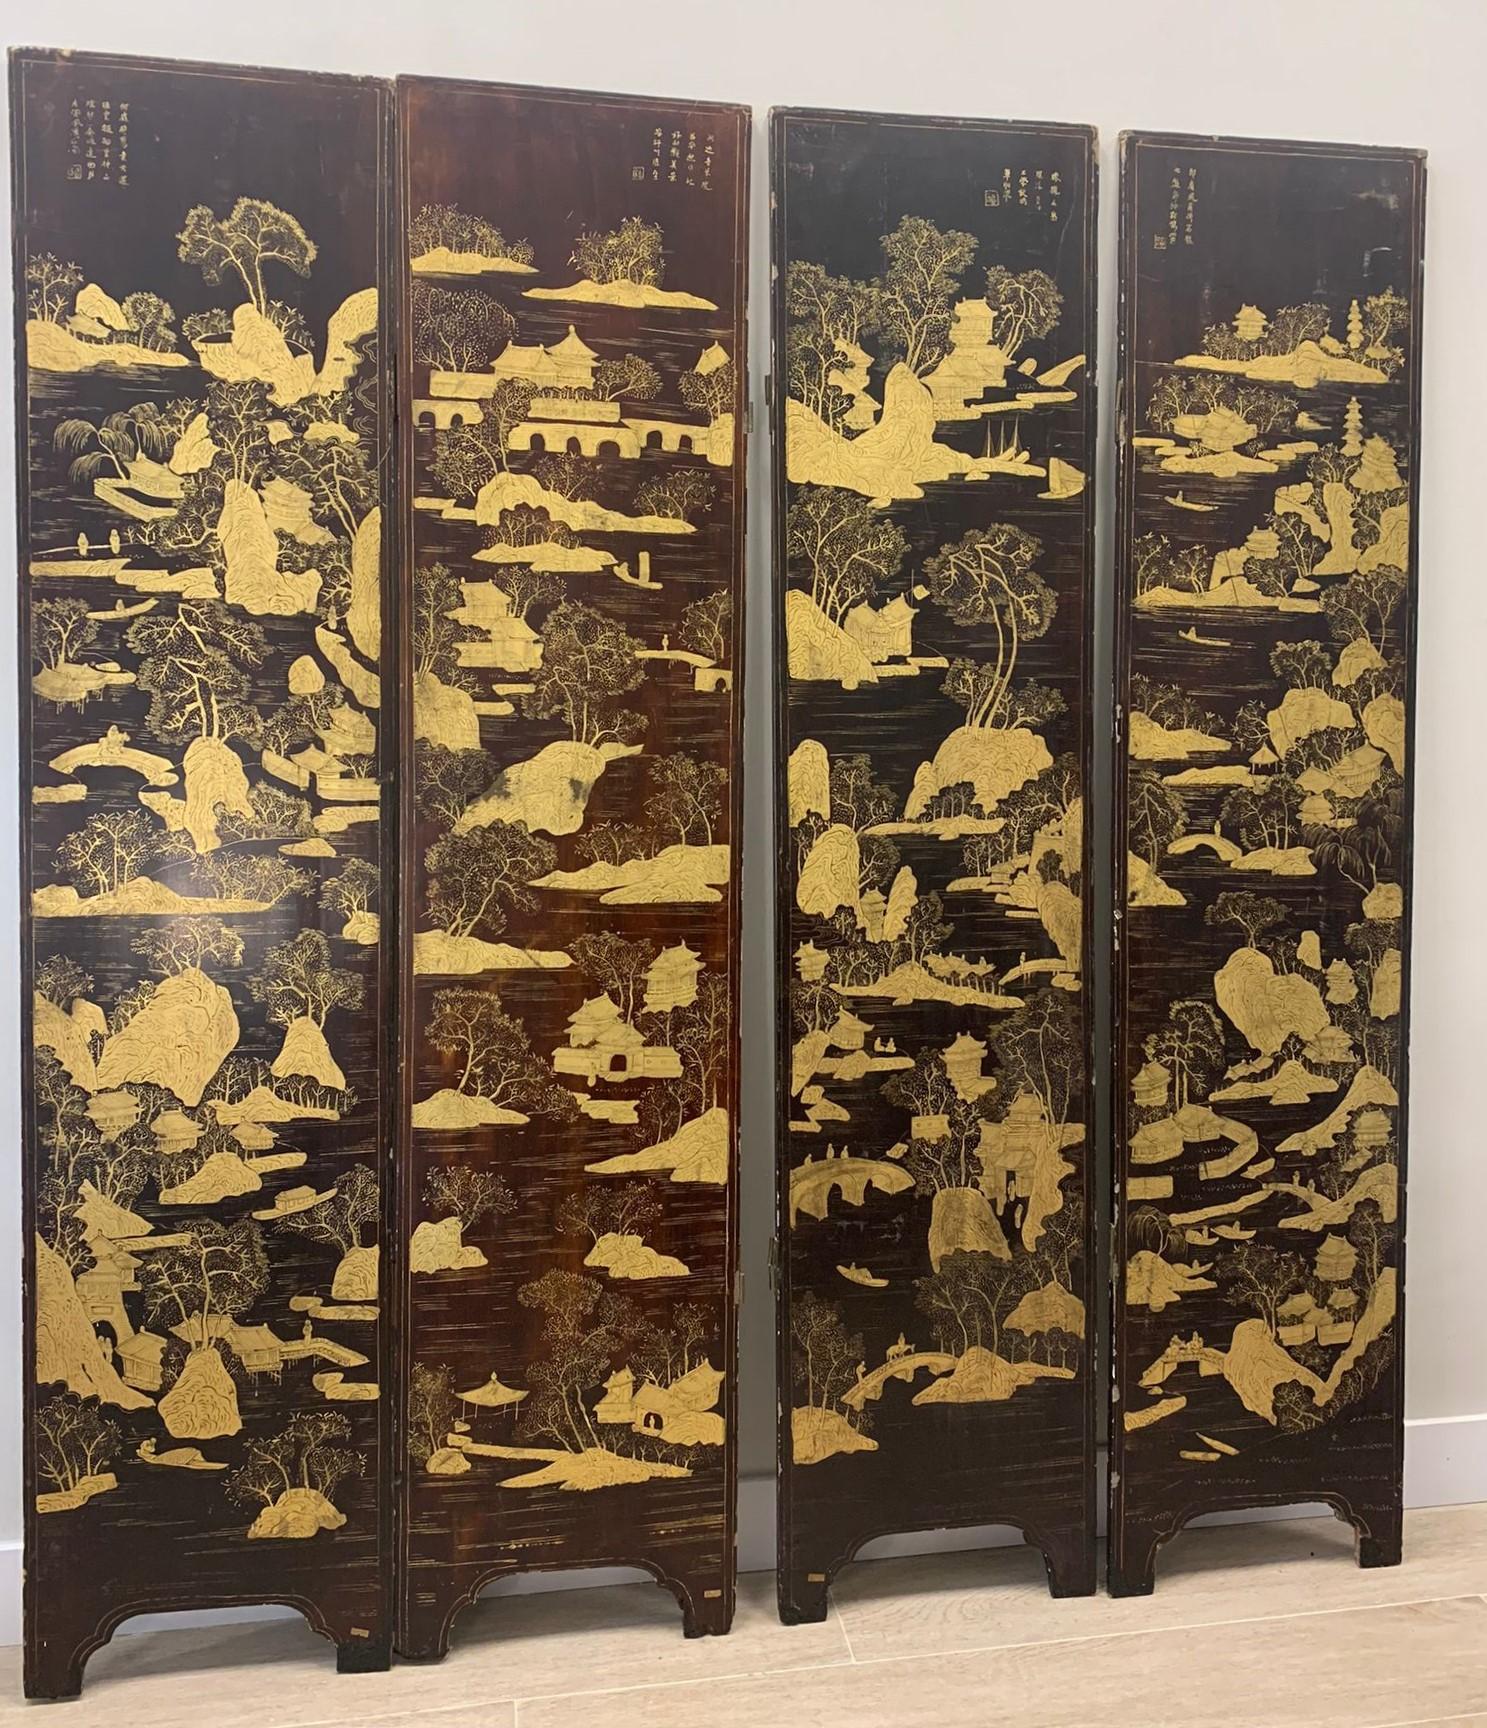 One of a kind Black lacquer screen with four panels or Coromandel-type leaves, belonging to the Chinese Qing dynasty, late 16th century - early 19th century. Different landscapes are depicted hand-painted with gold on a black lacquer background. In